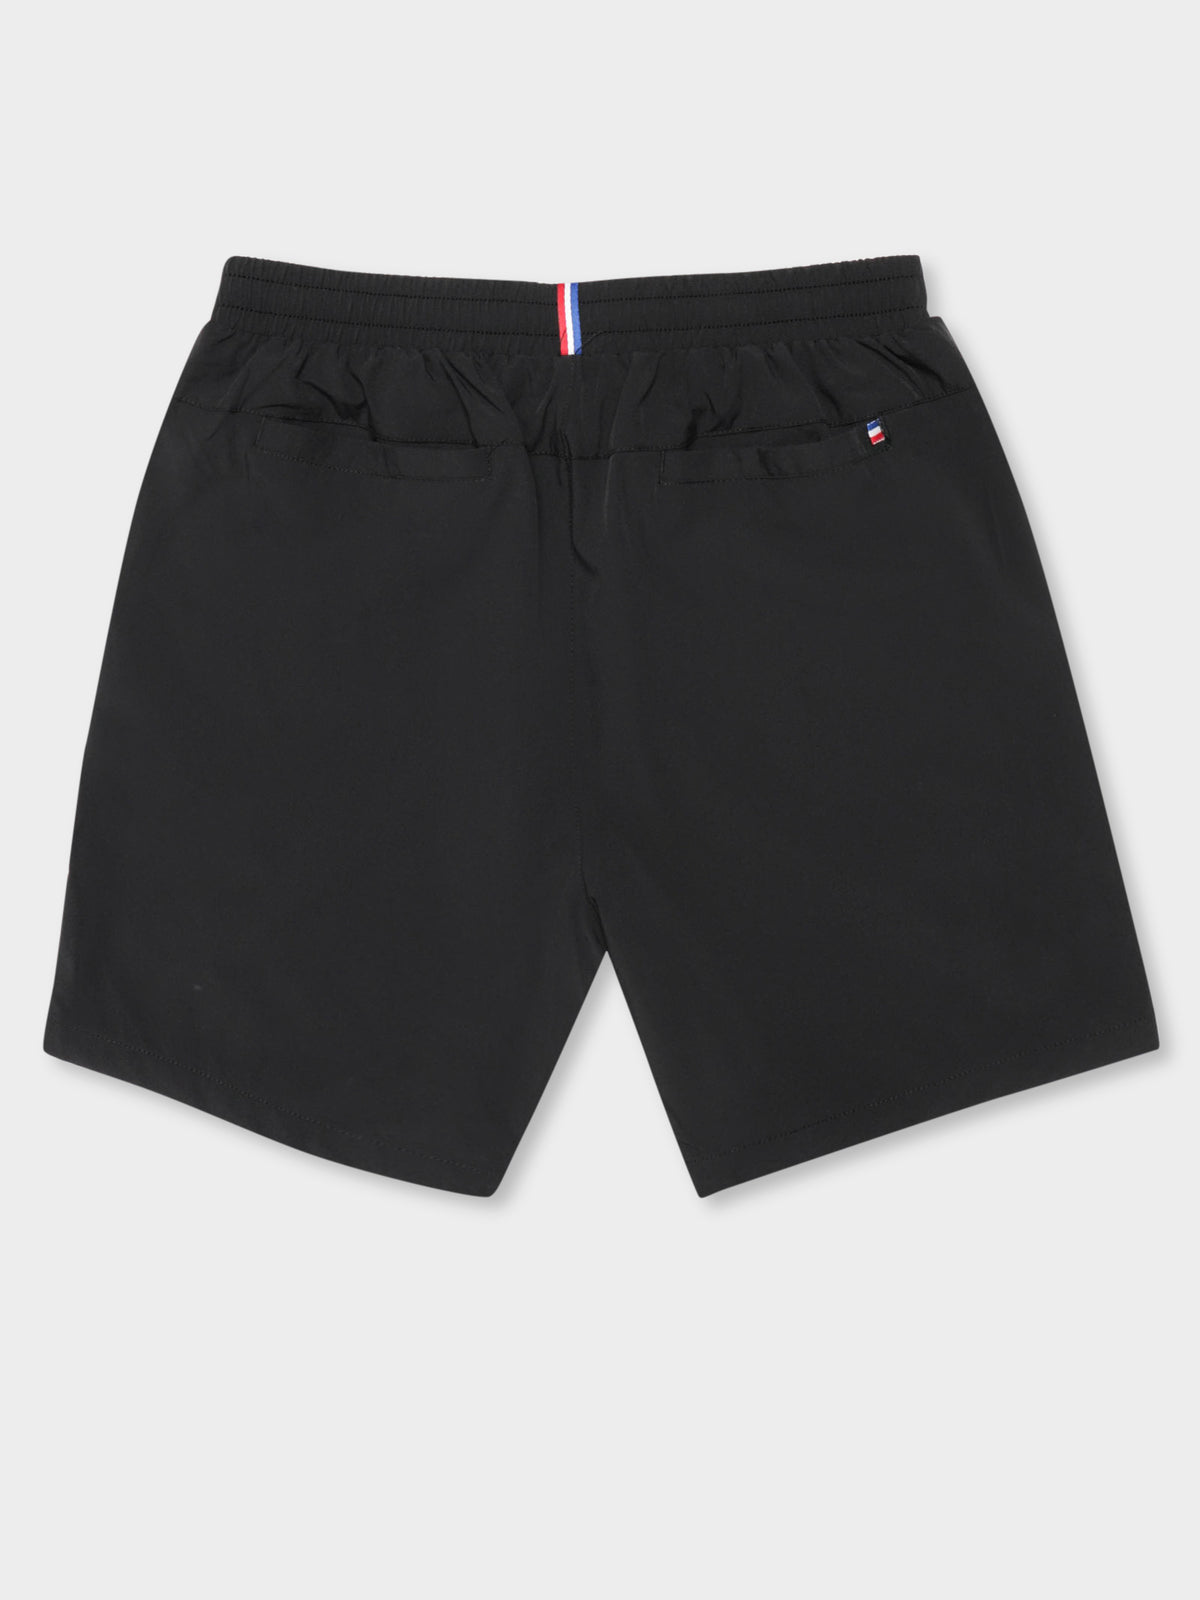 Concurrent Shorts in Black